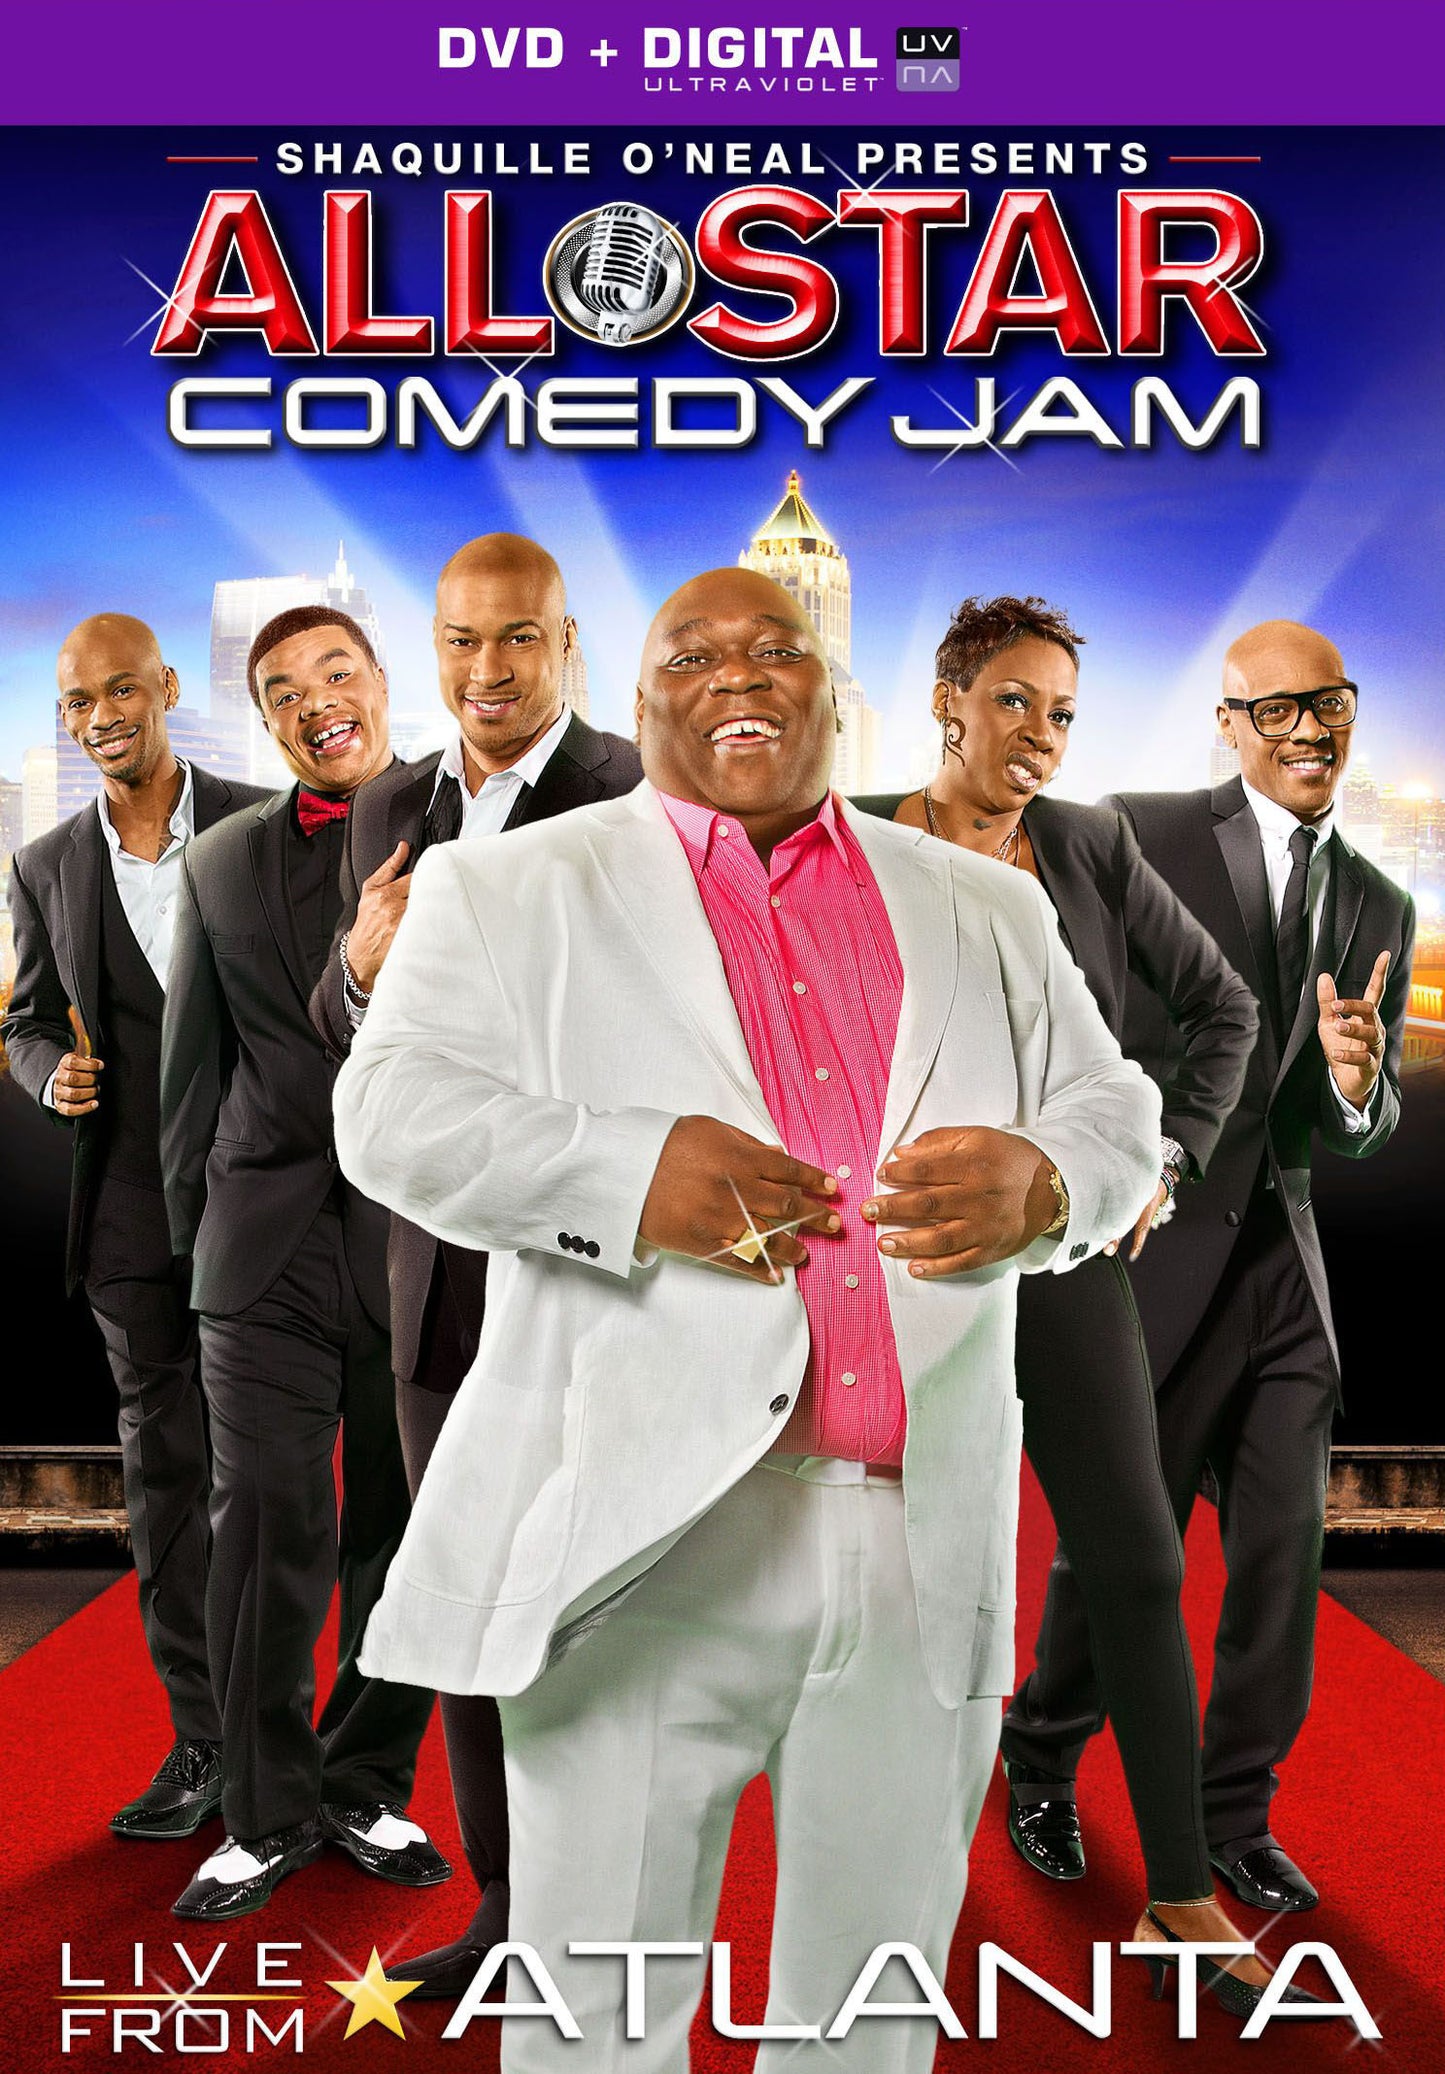 Shaquille O'Neal Presents: All Star Comedy Jam - Live from Atlanta cover art